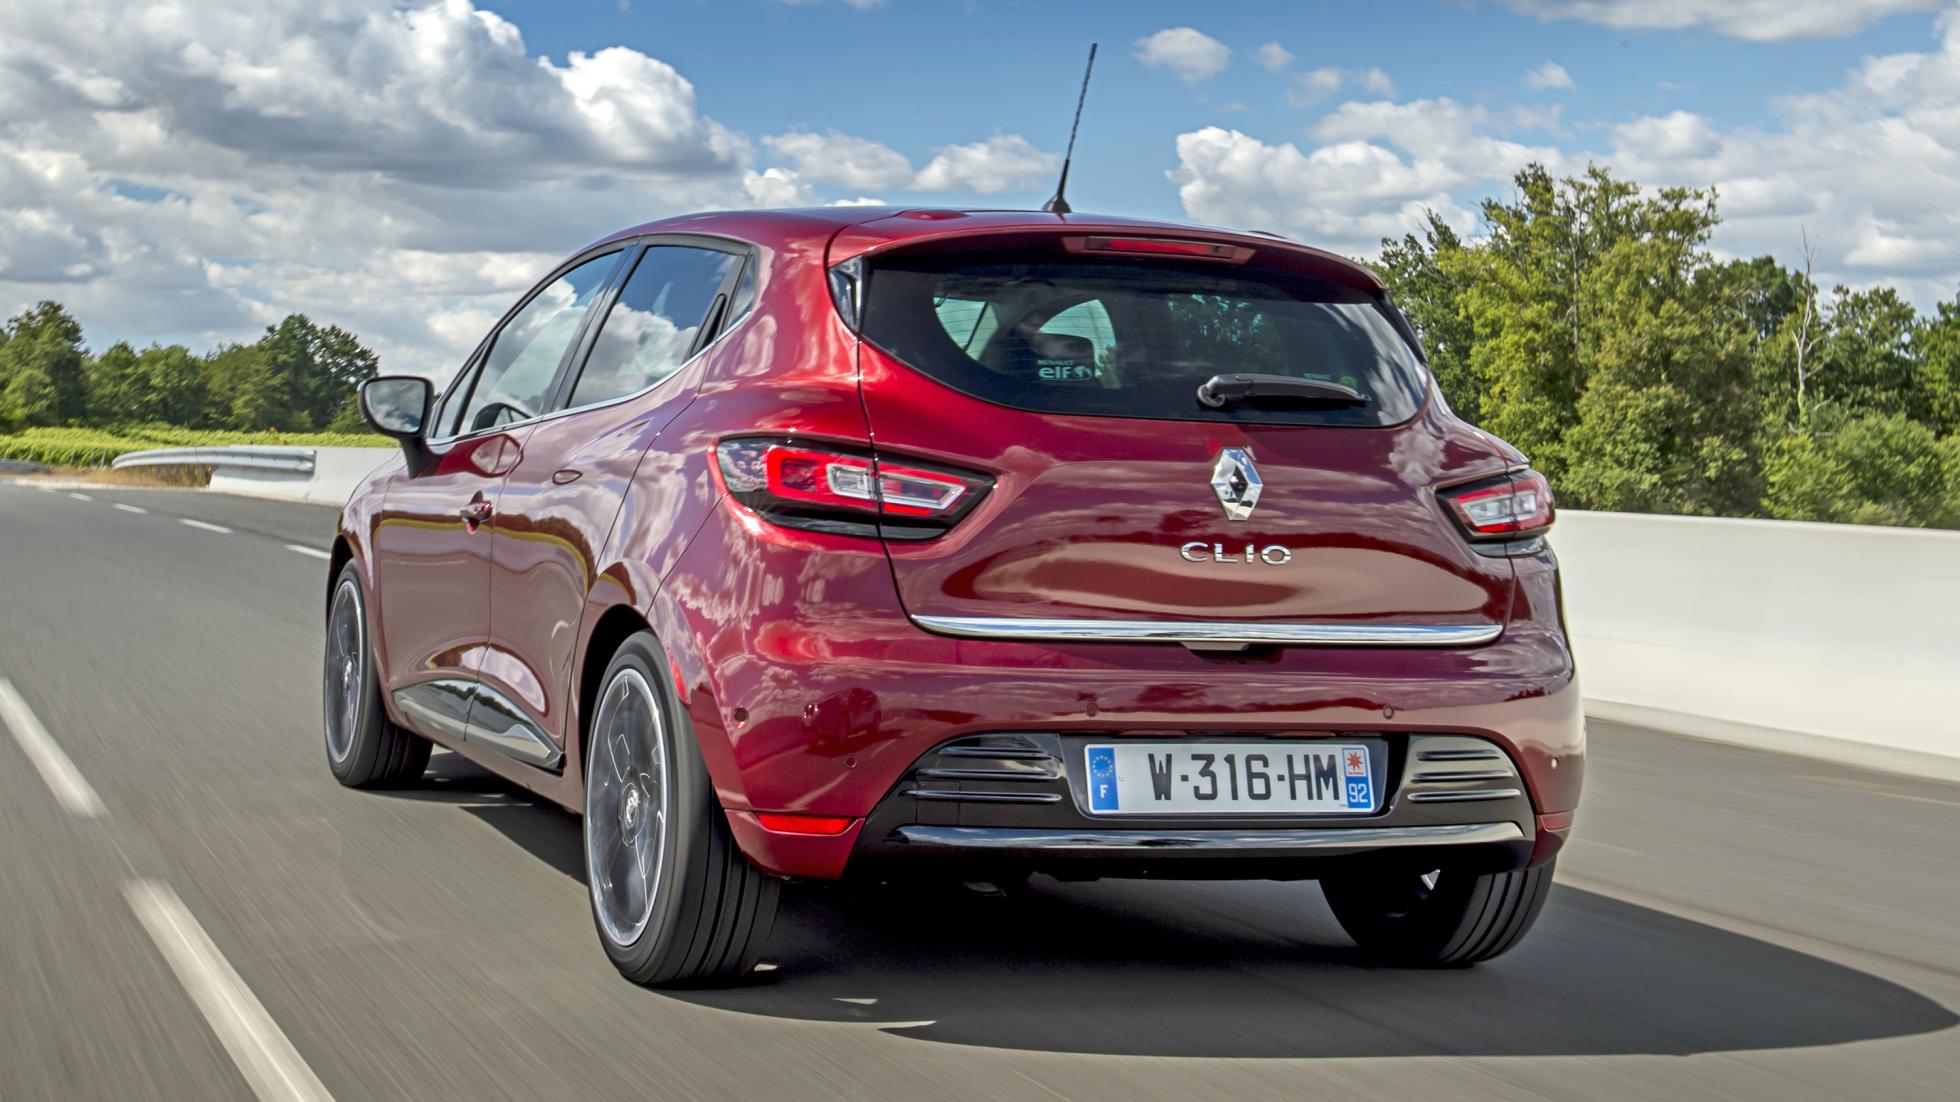 Renault Clio Facelift at the rear end